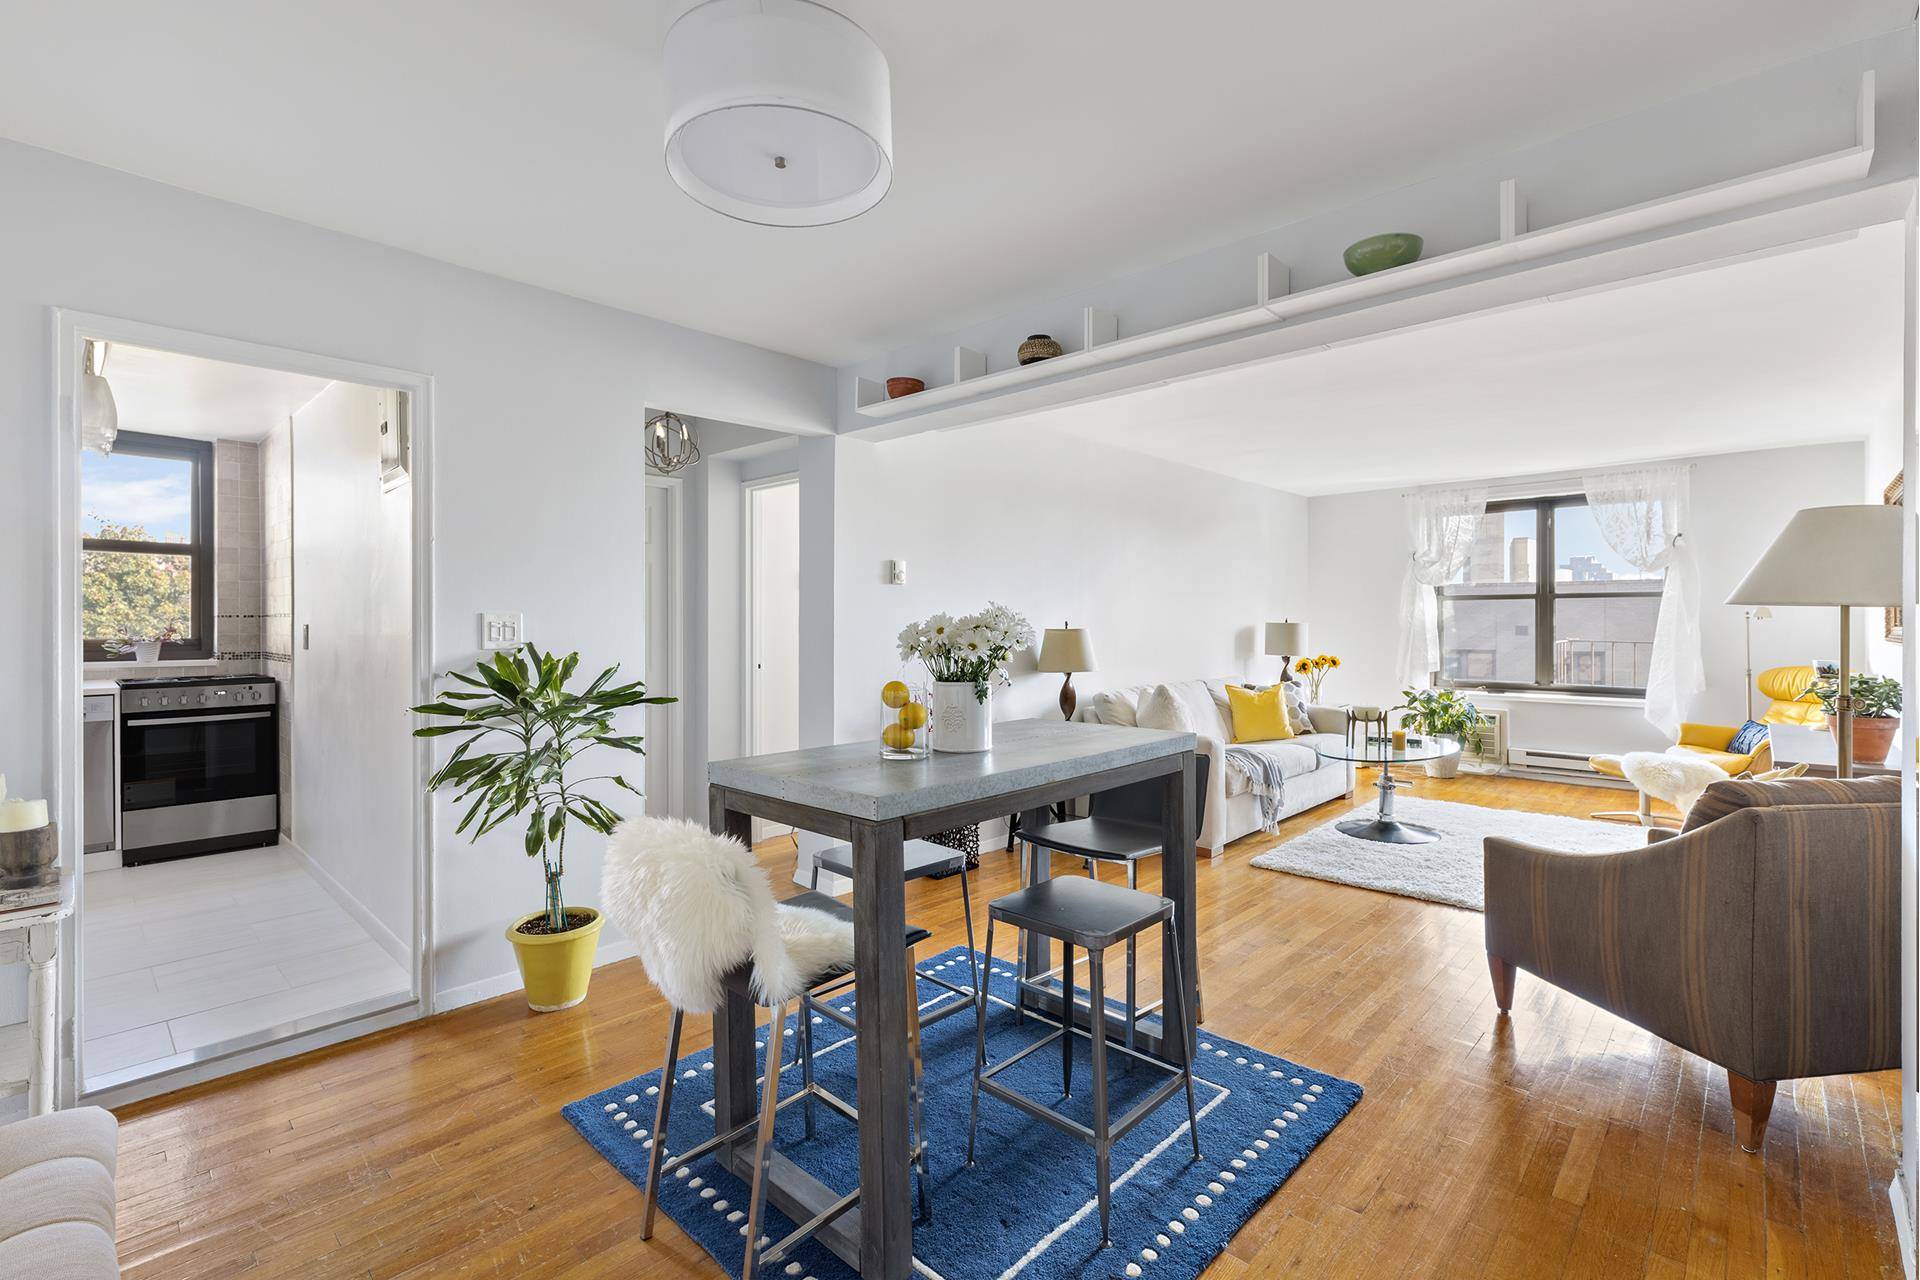 Perched on a high floor tastefully renovated this spacious one bedroom sanctuary has expansive unobstructed open sky views, leafy treetops below with streaming sunlight all day long.